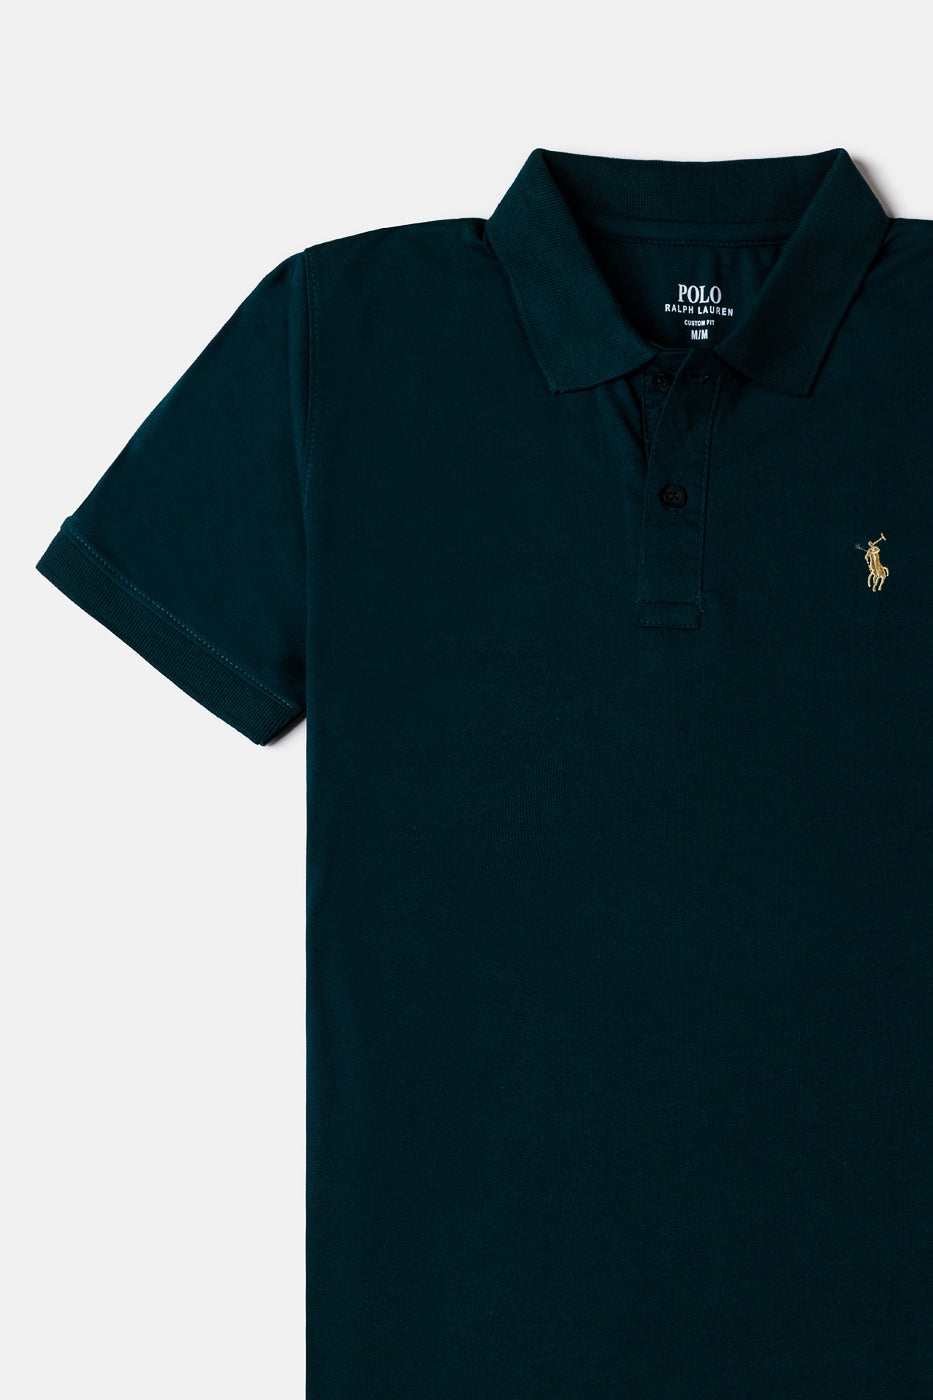 RL Premium Imported Polo Shirt - Forest